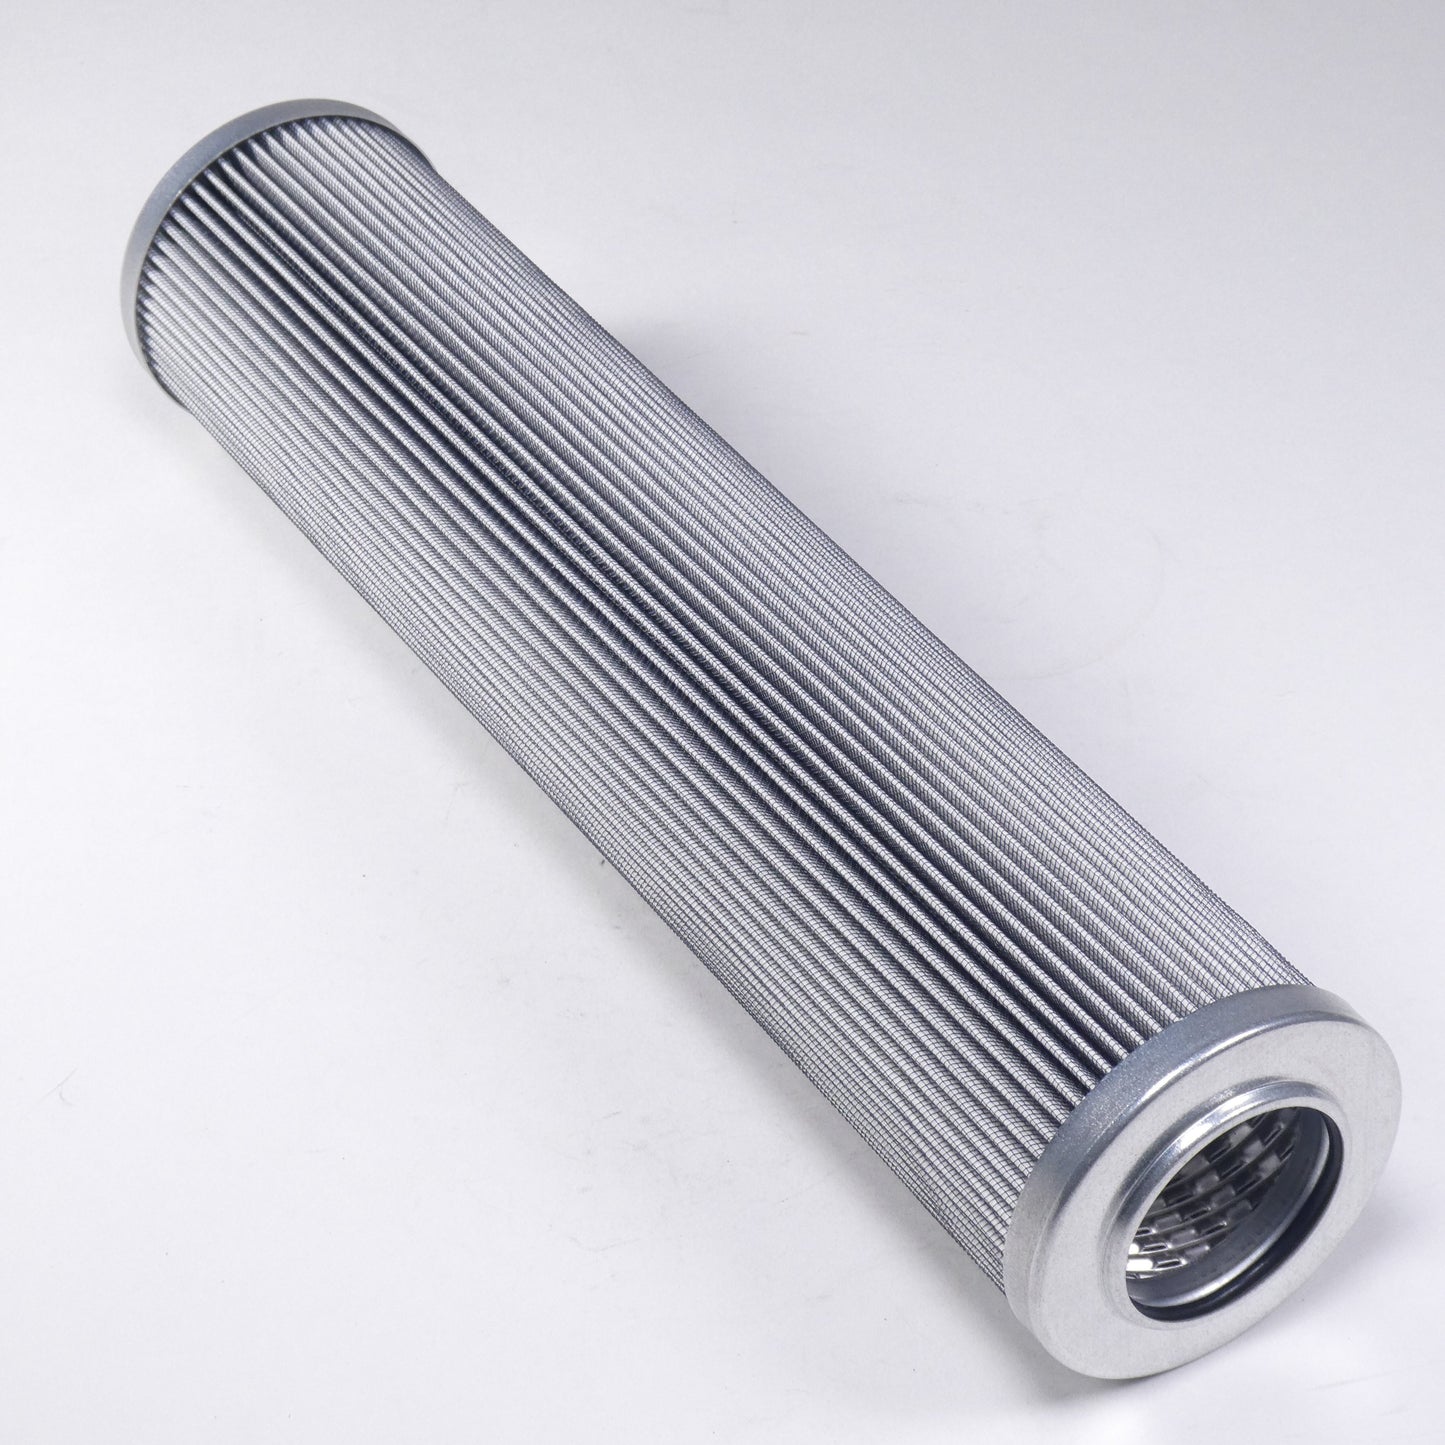 Hydrafil Replacement Filter Element for Filtersoft H8926MFB